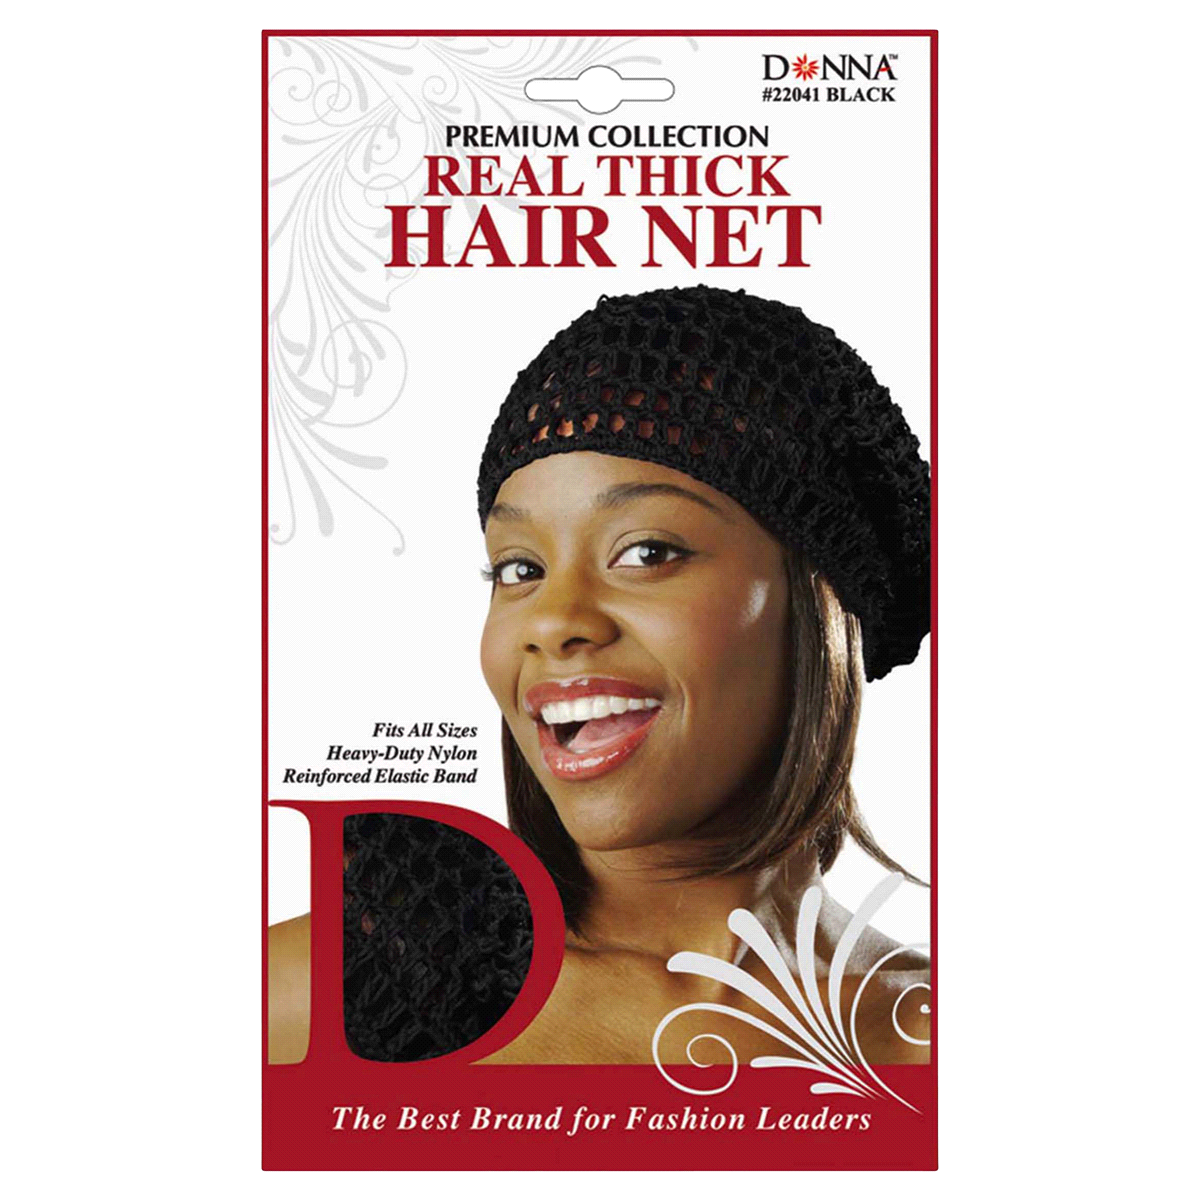 Donna real thick hair net